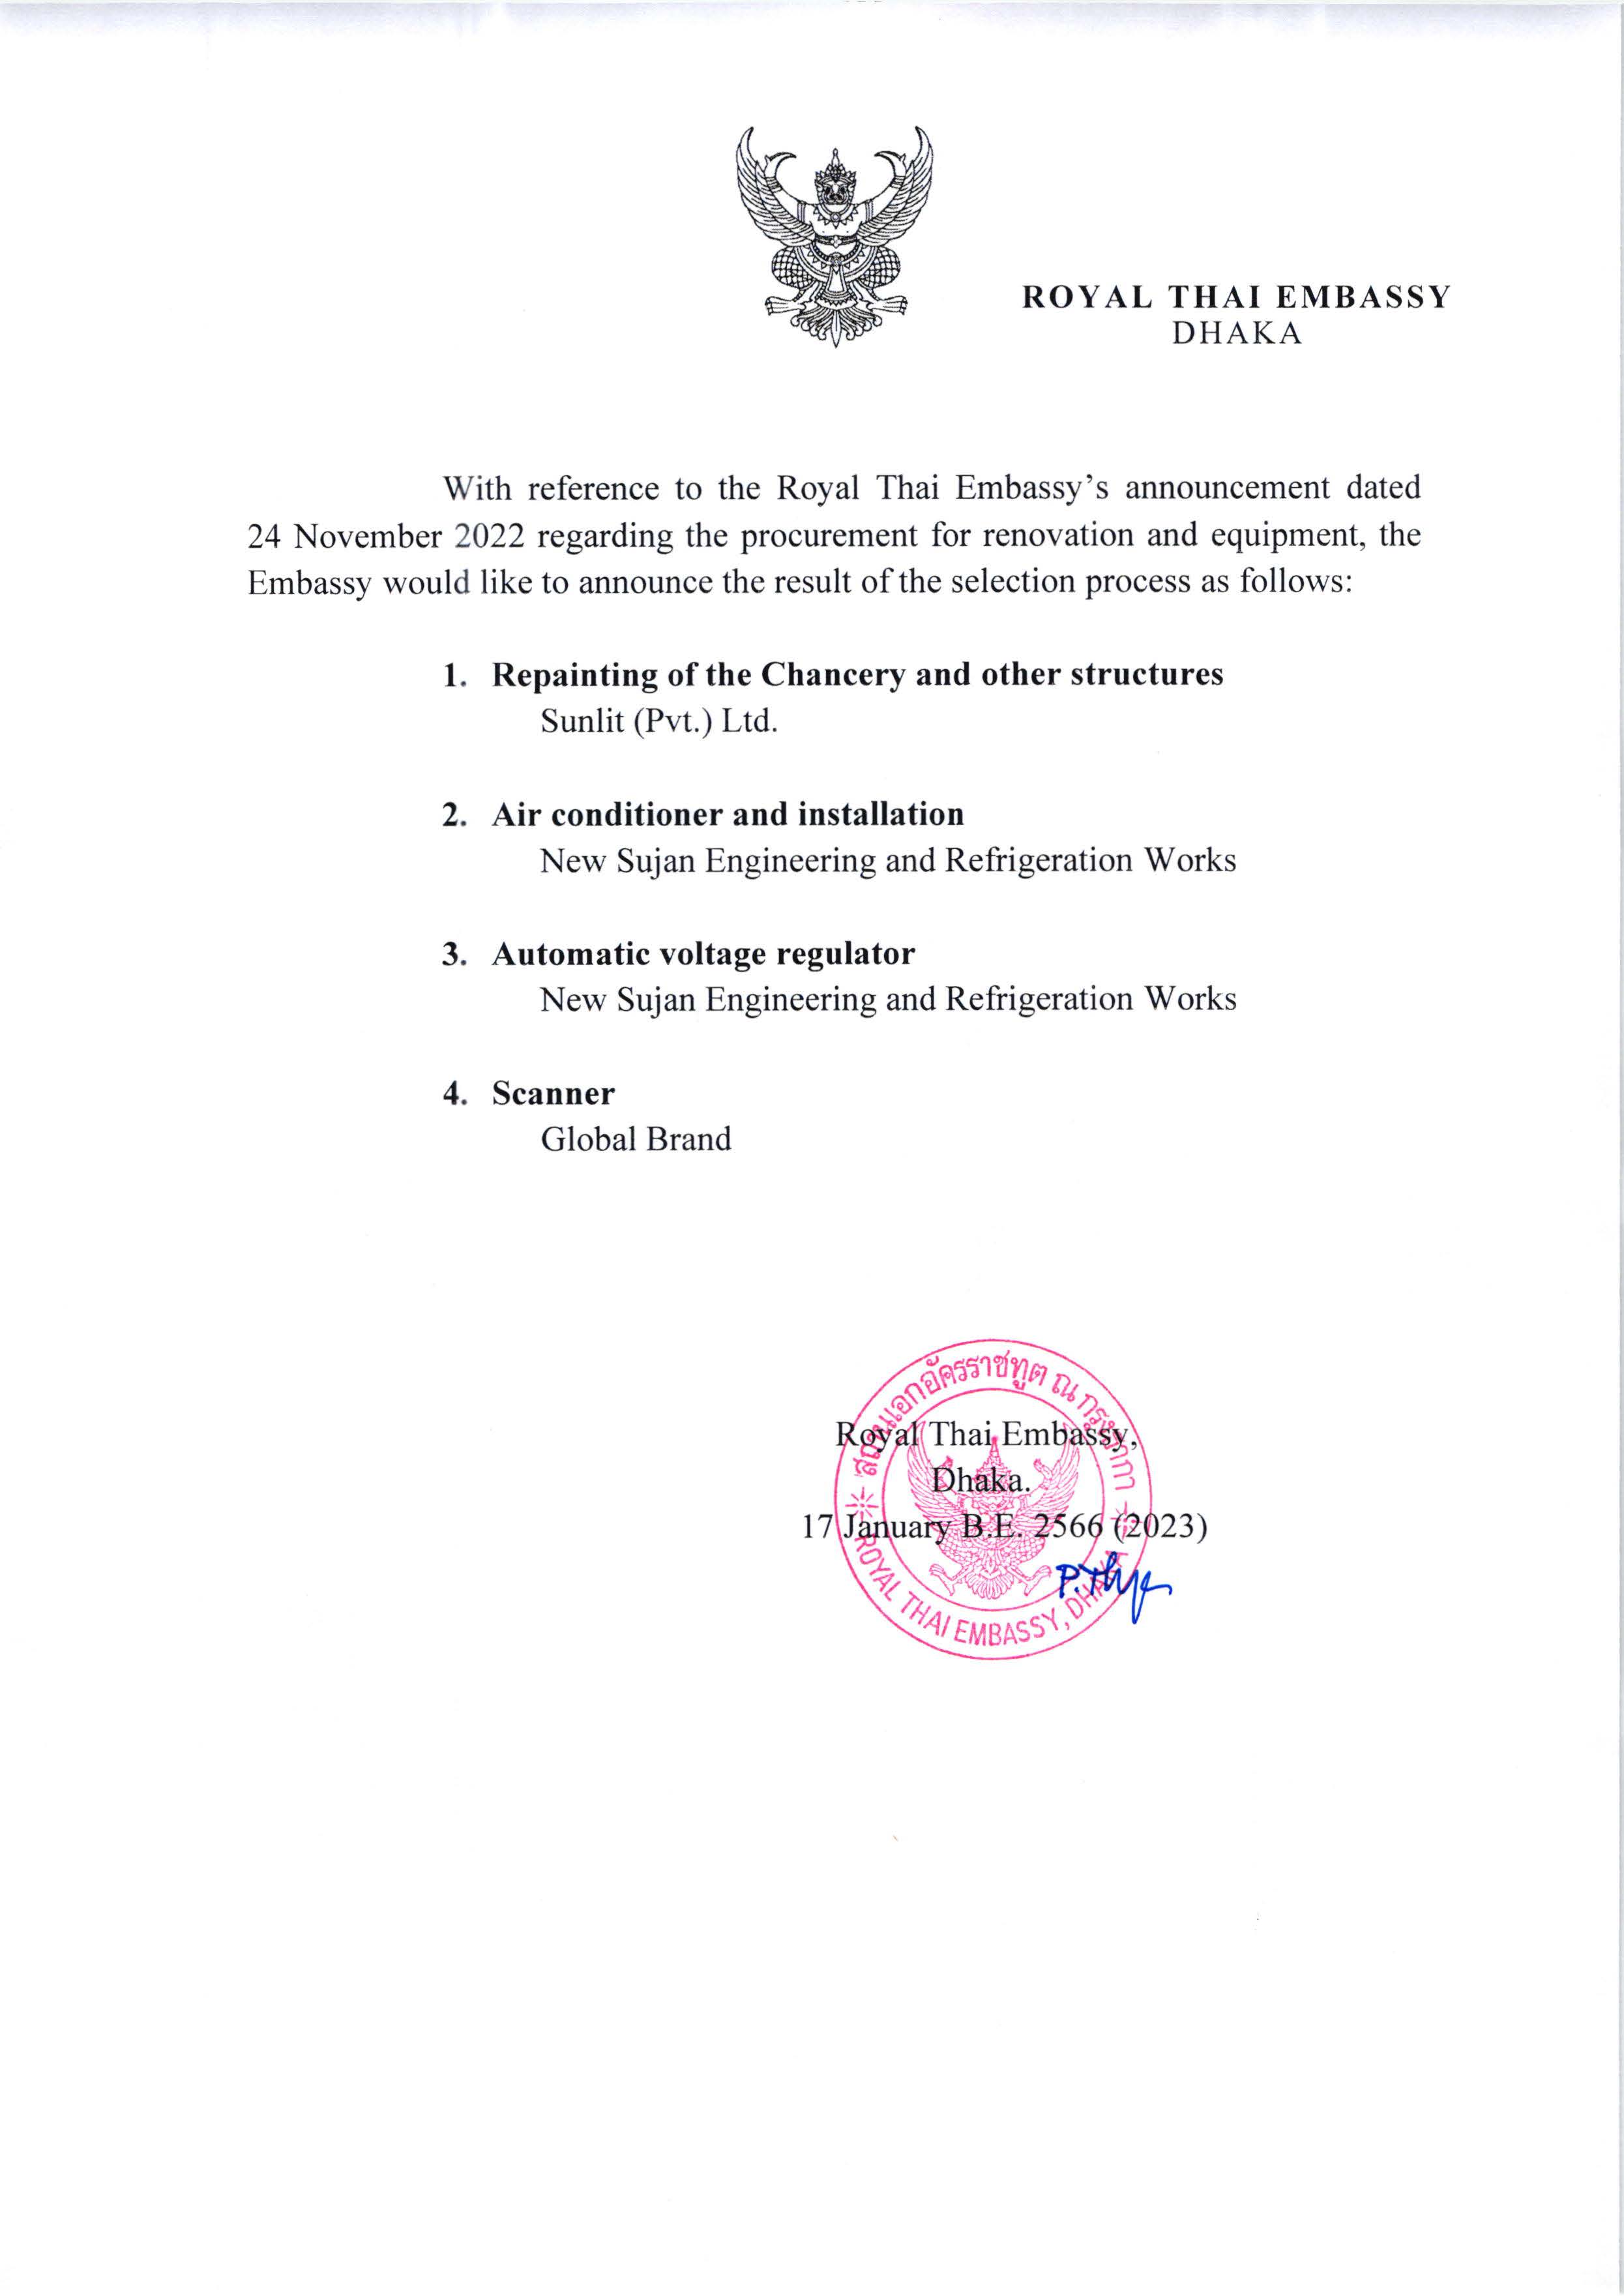 Embassy_Announcement_of_Selected_Companies